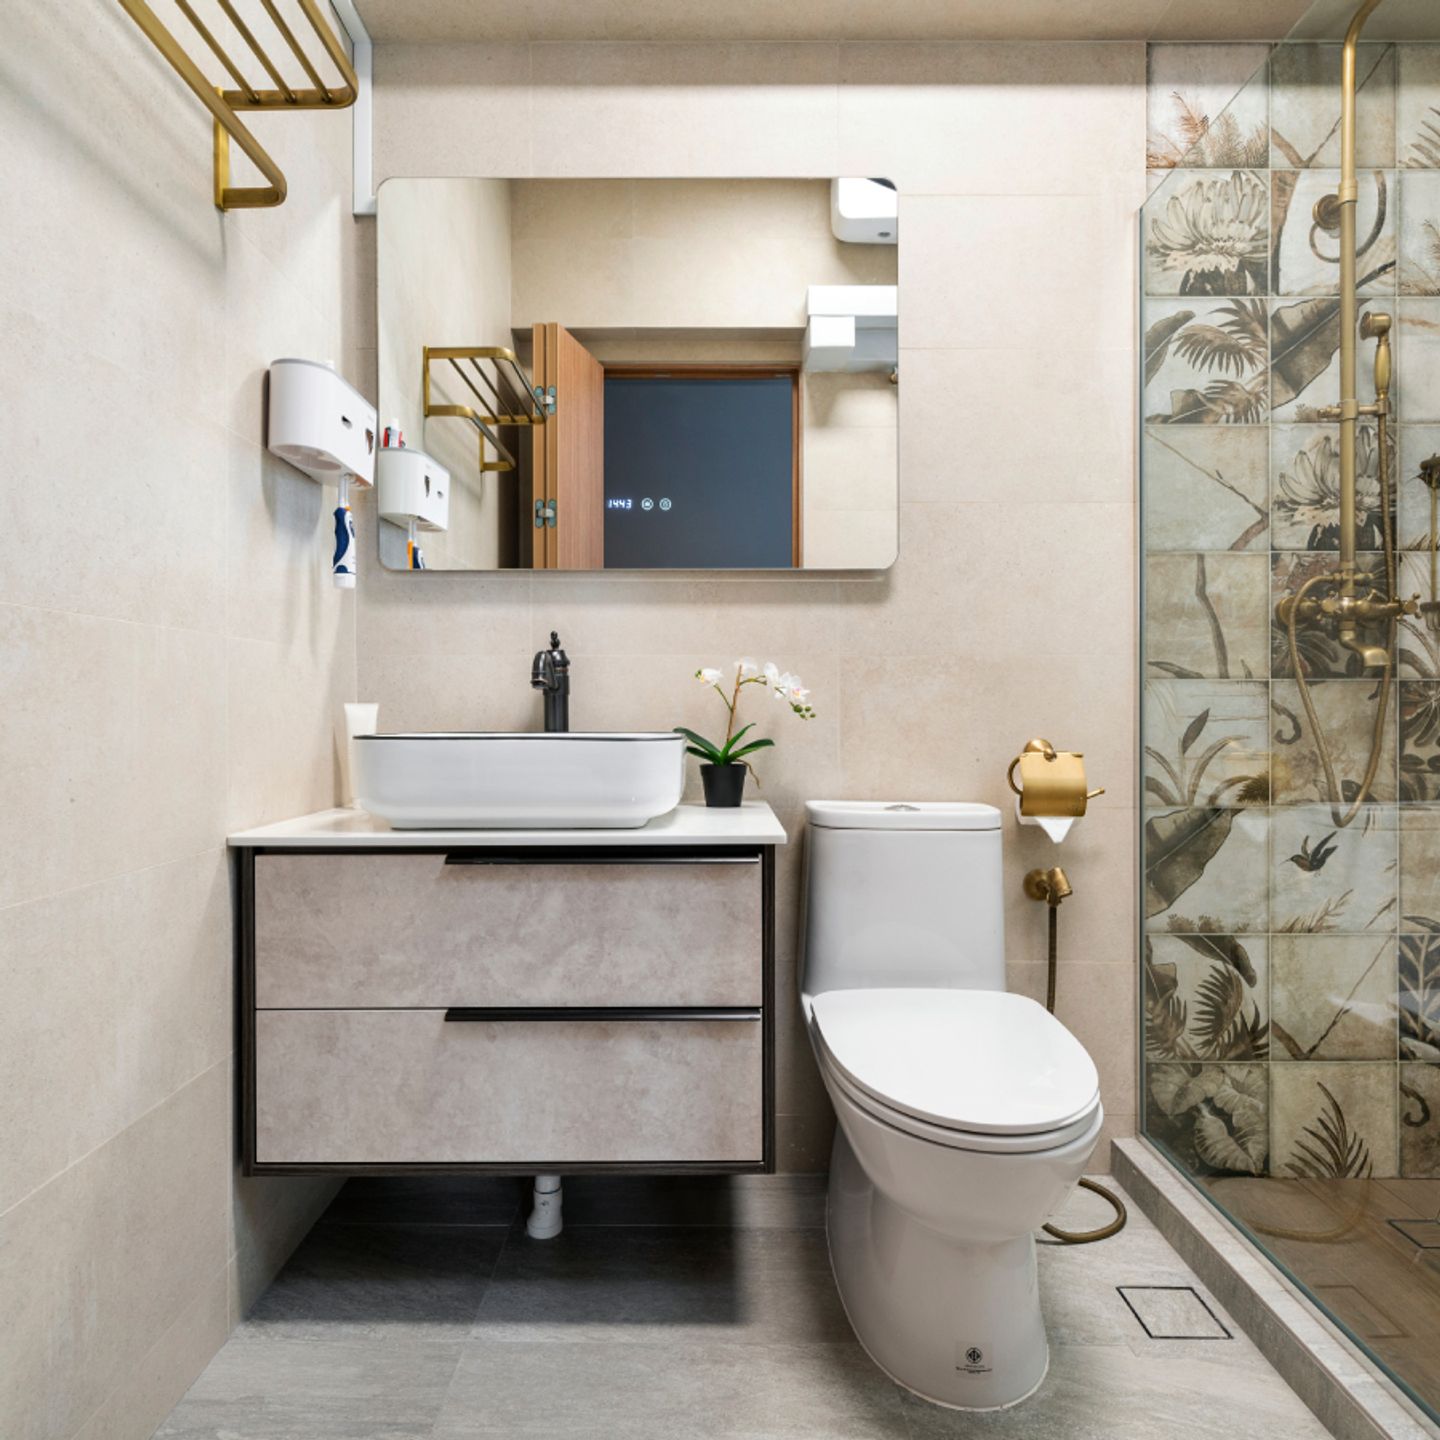 Minimal Bathroom Design With A Glass Partition - Livspace